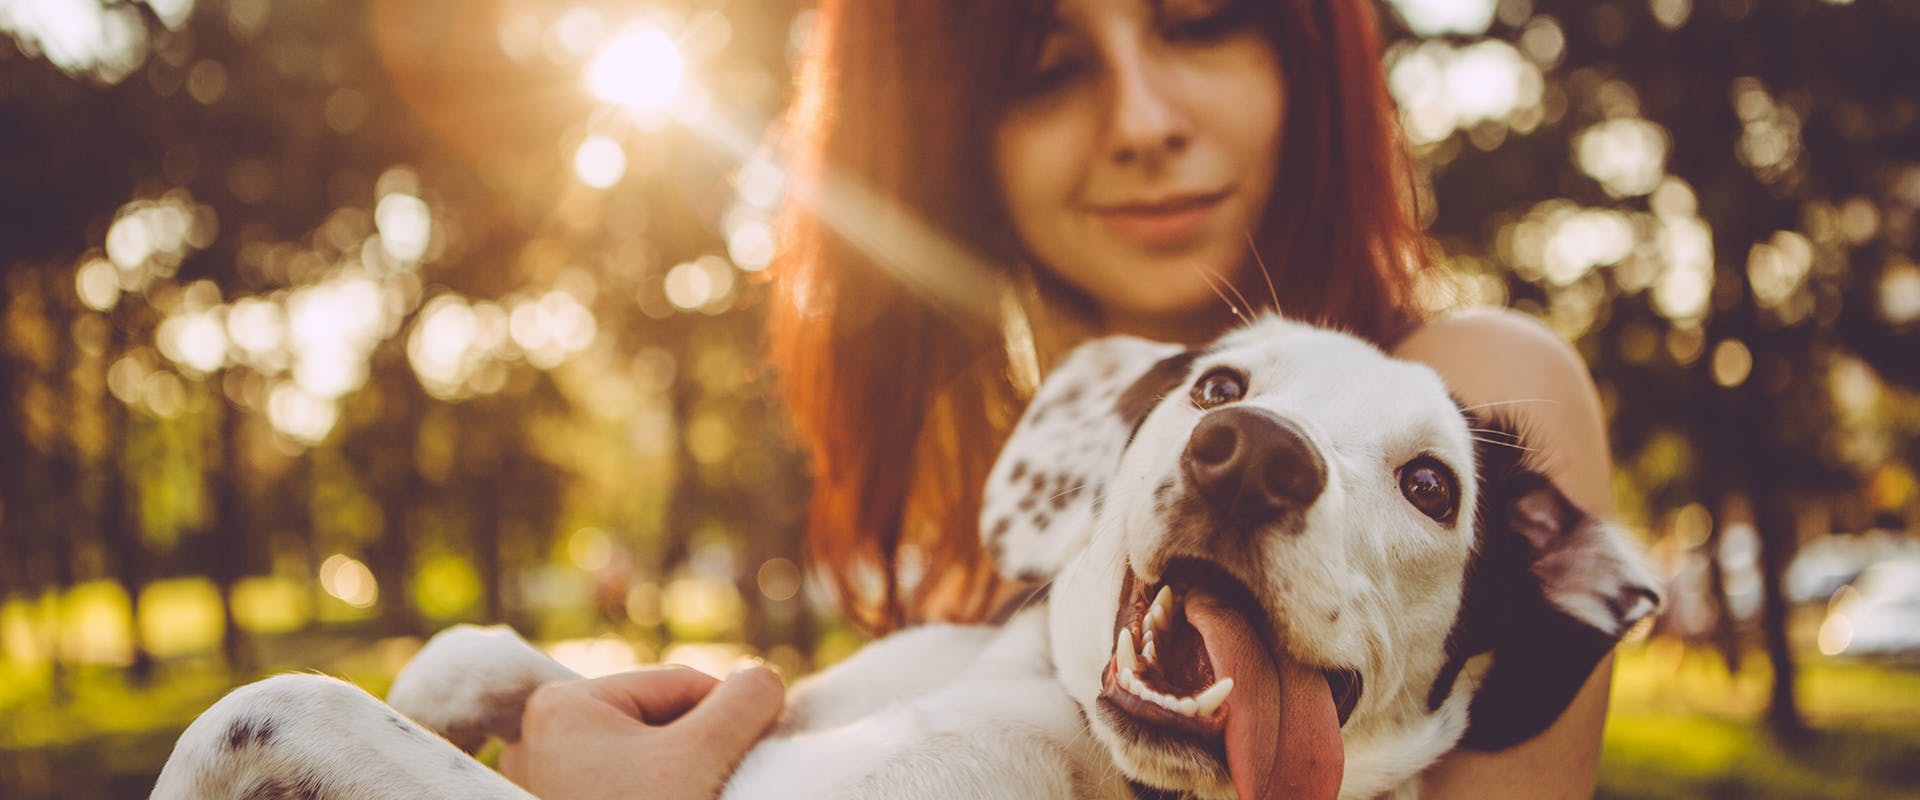 How to show your dog you love them: a woman holding a happy dog in her arms